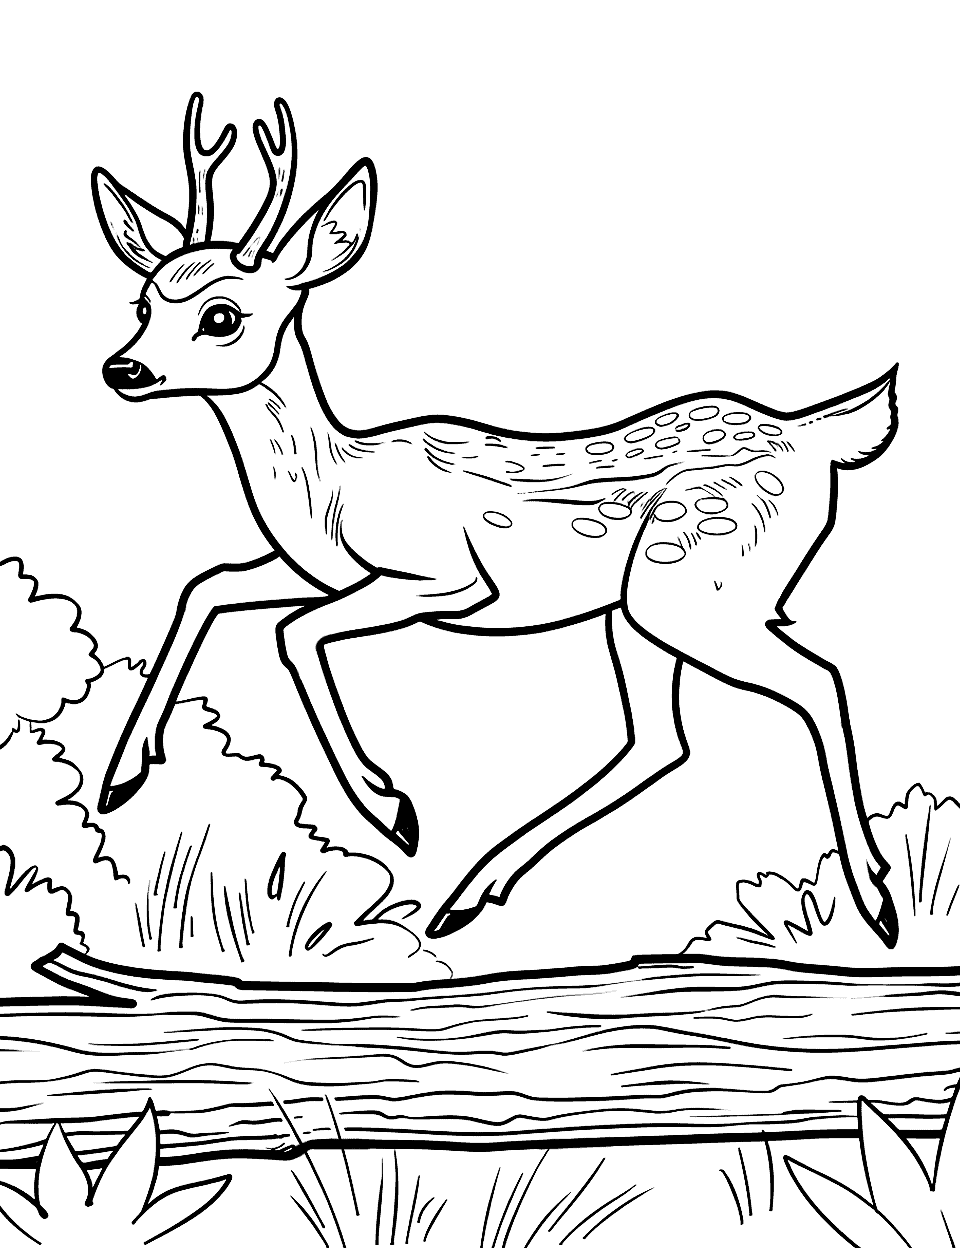 Deer Leaping Over a Log Coloring Page - An action scene of a deer gracefully leaping over a fallen log.